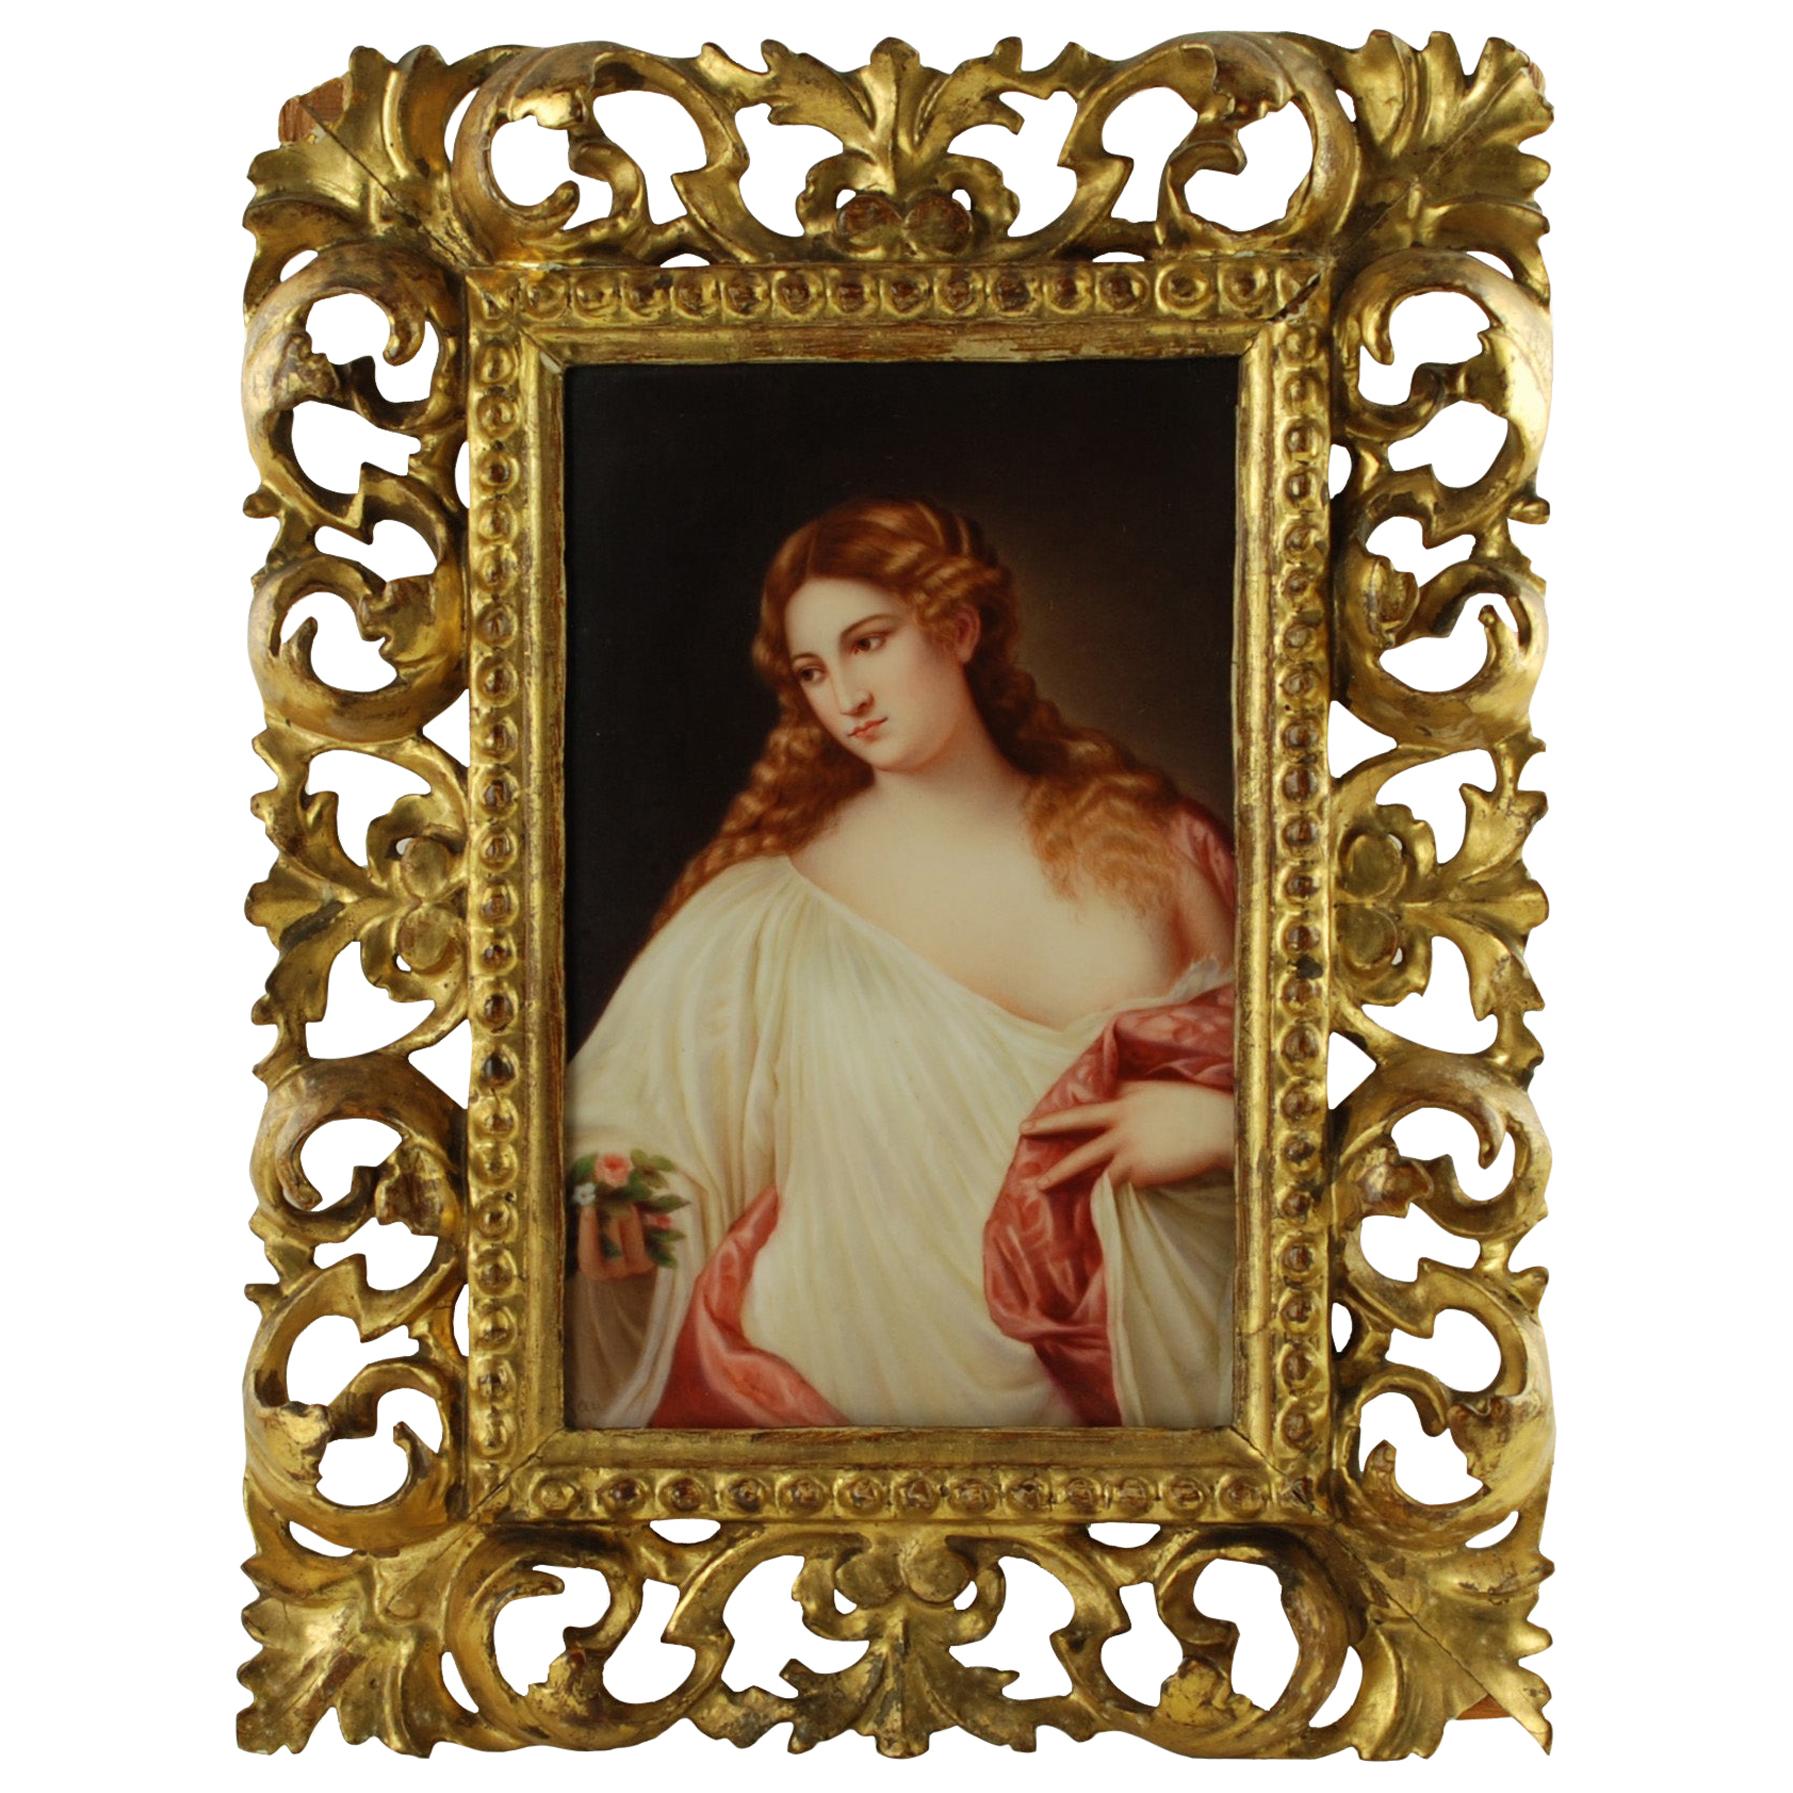 19th Century Hand-Painted Porcelain Plaque, "Flora" after Titian Signed by Rau For Sale